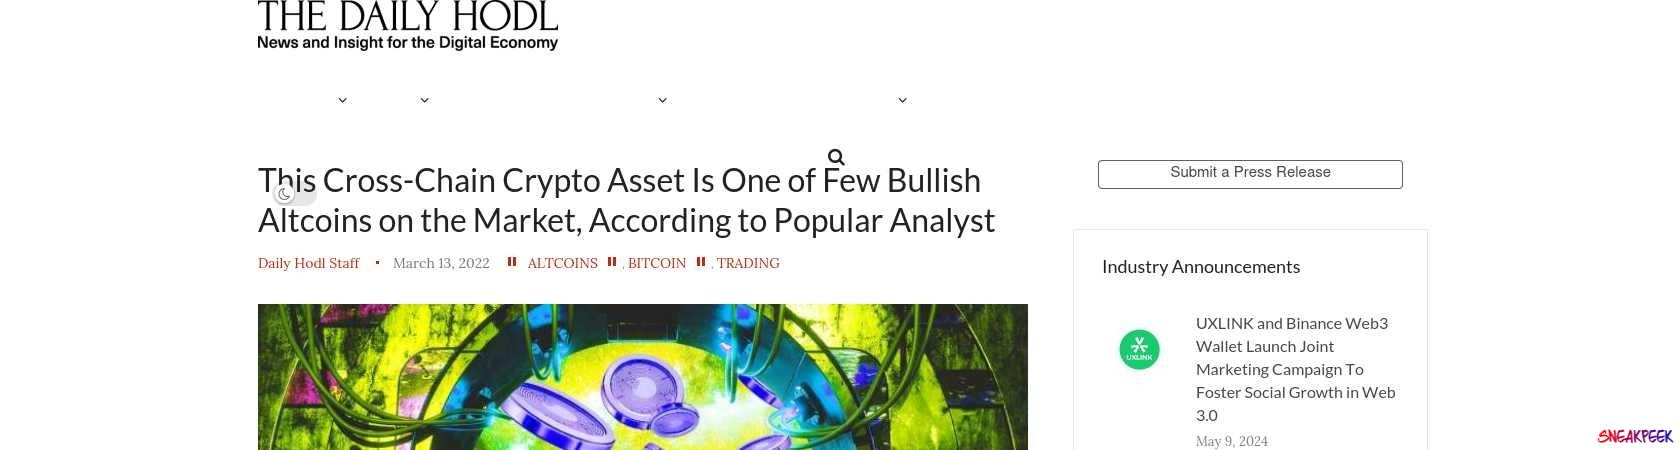 Read the full Article:  ⭲ This Cross-Chain Crypto Asset Is One of Few Bullish Altcoins on the Market, According to Popular Analyst